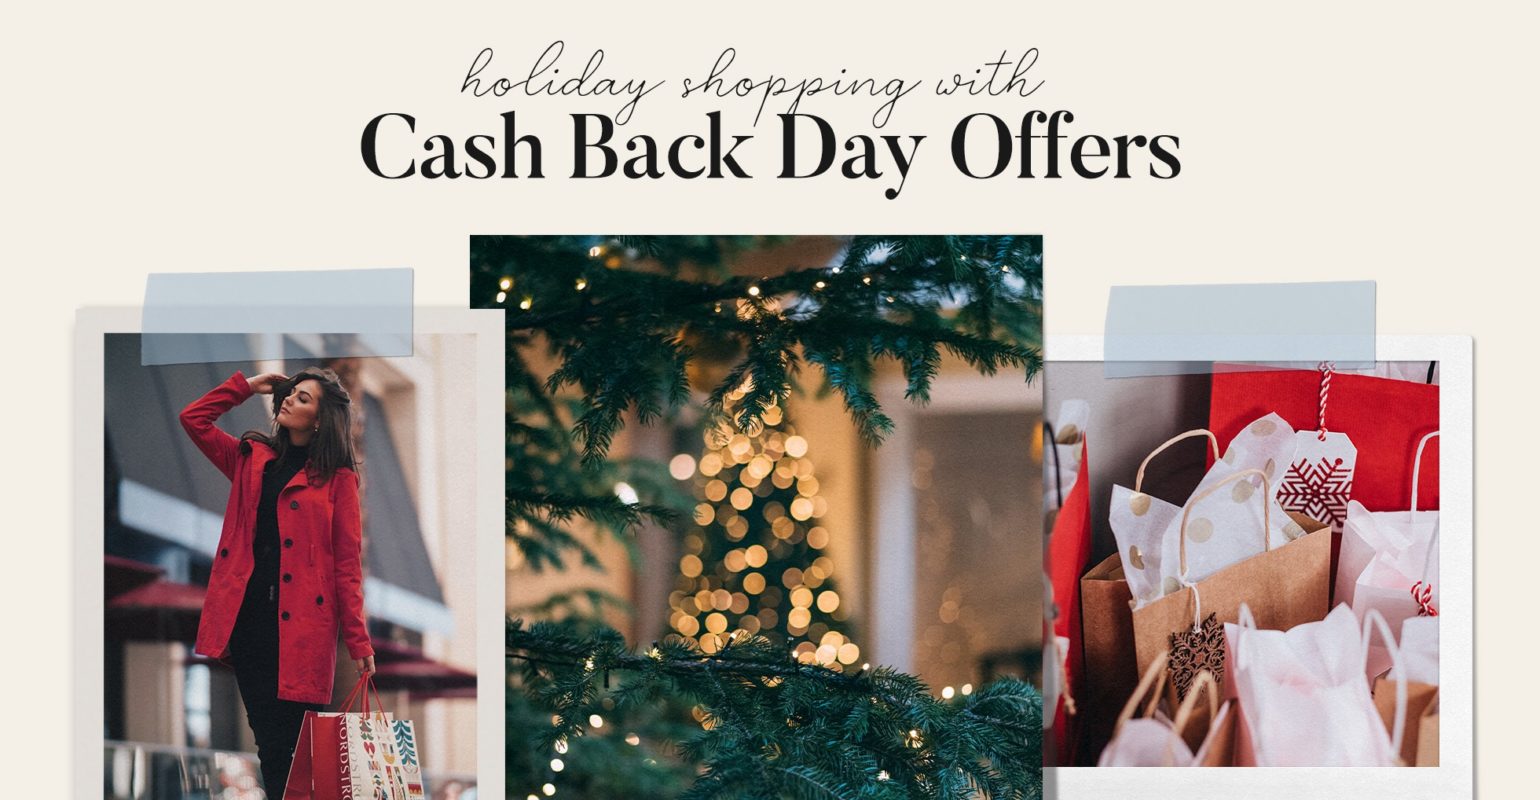 Get the best cash back shopping offers this holiday season